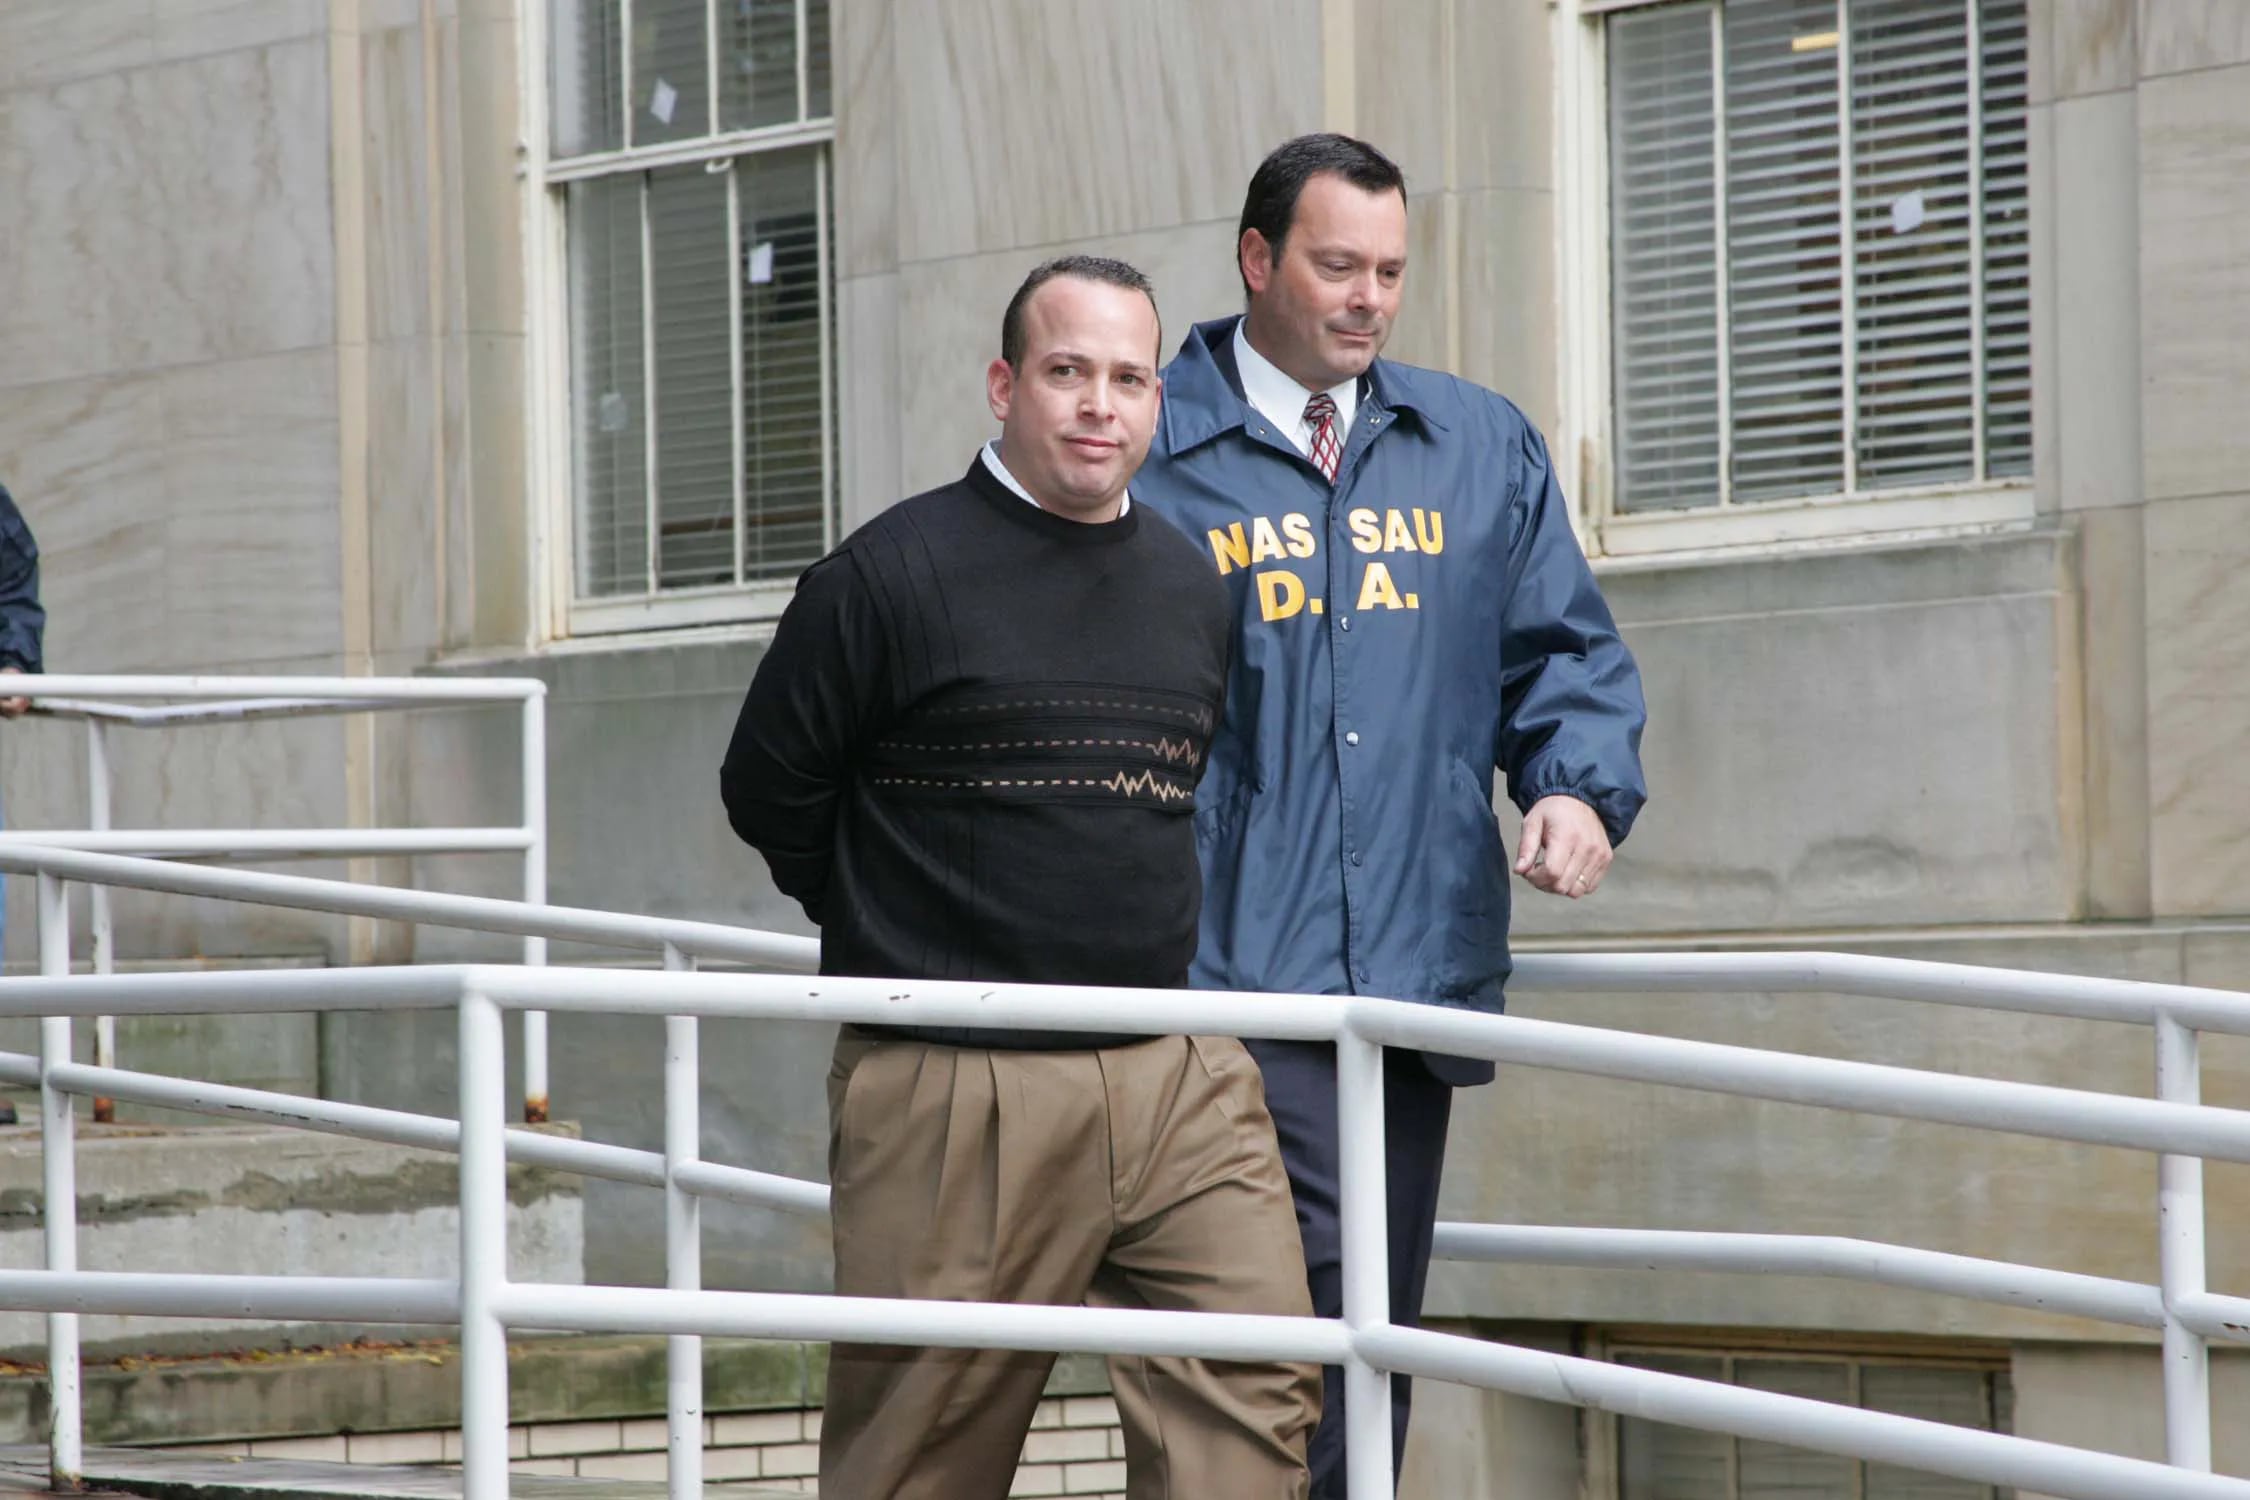 Joseph W. LaForte is escorted out of police headquarters in Mineola, N.Y. in October 2005 after he and members of his family were charged with running a $12 million money laundering ring. (Photo by Ellis Kaplan)